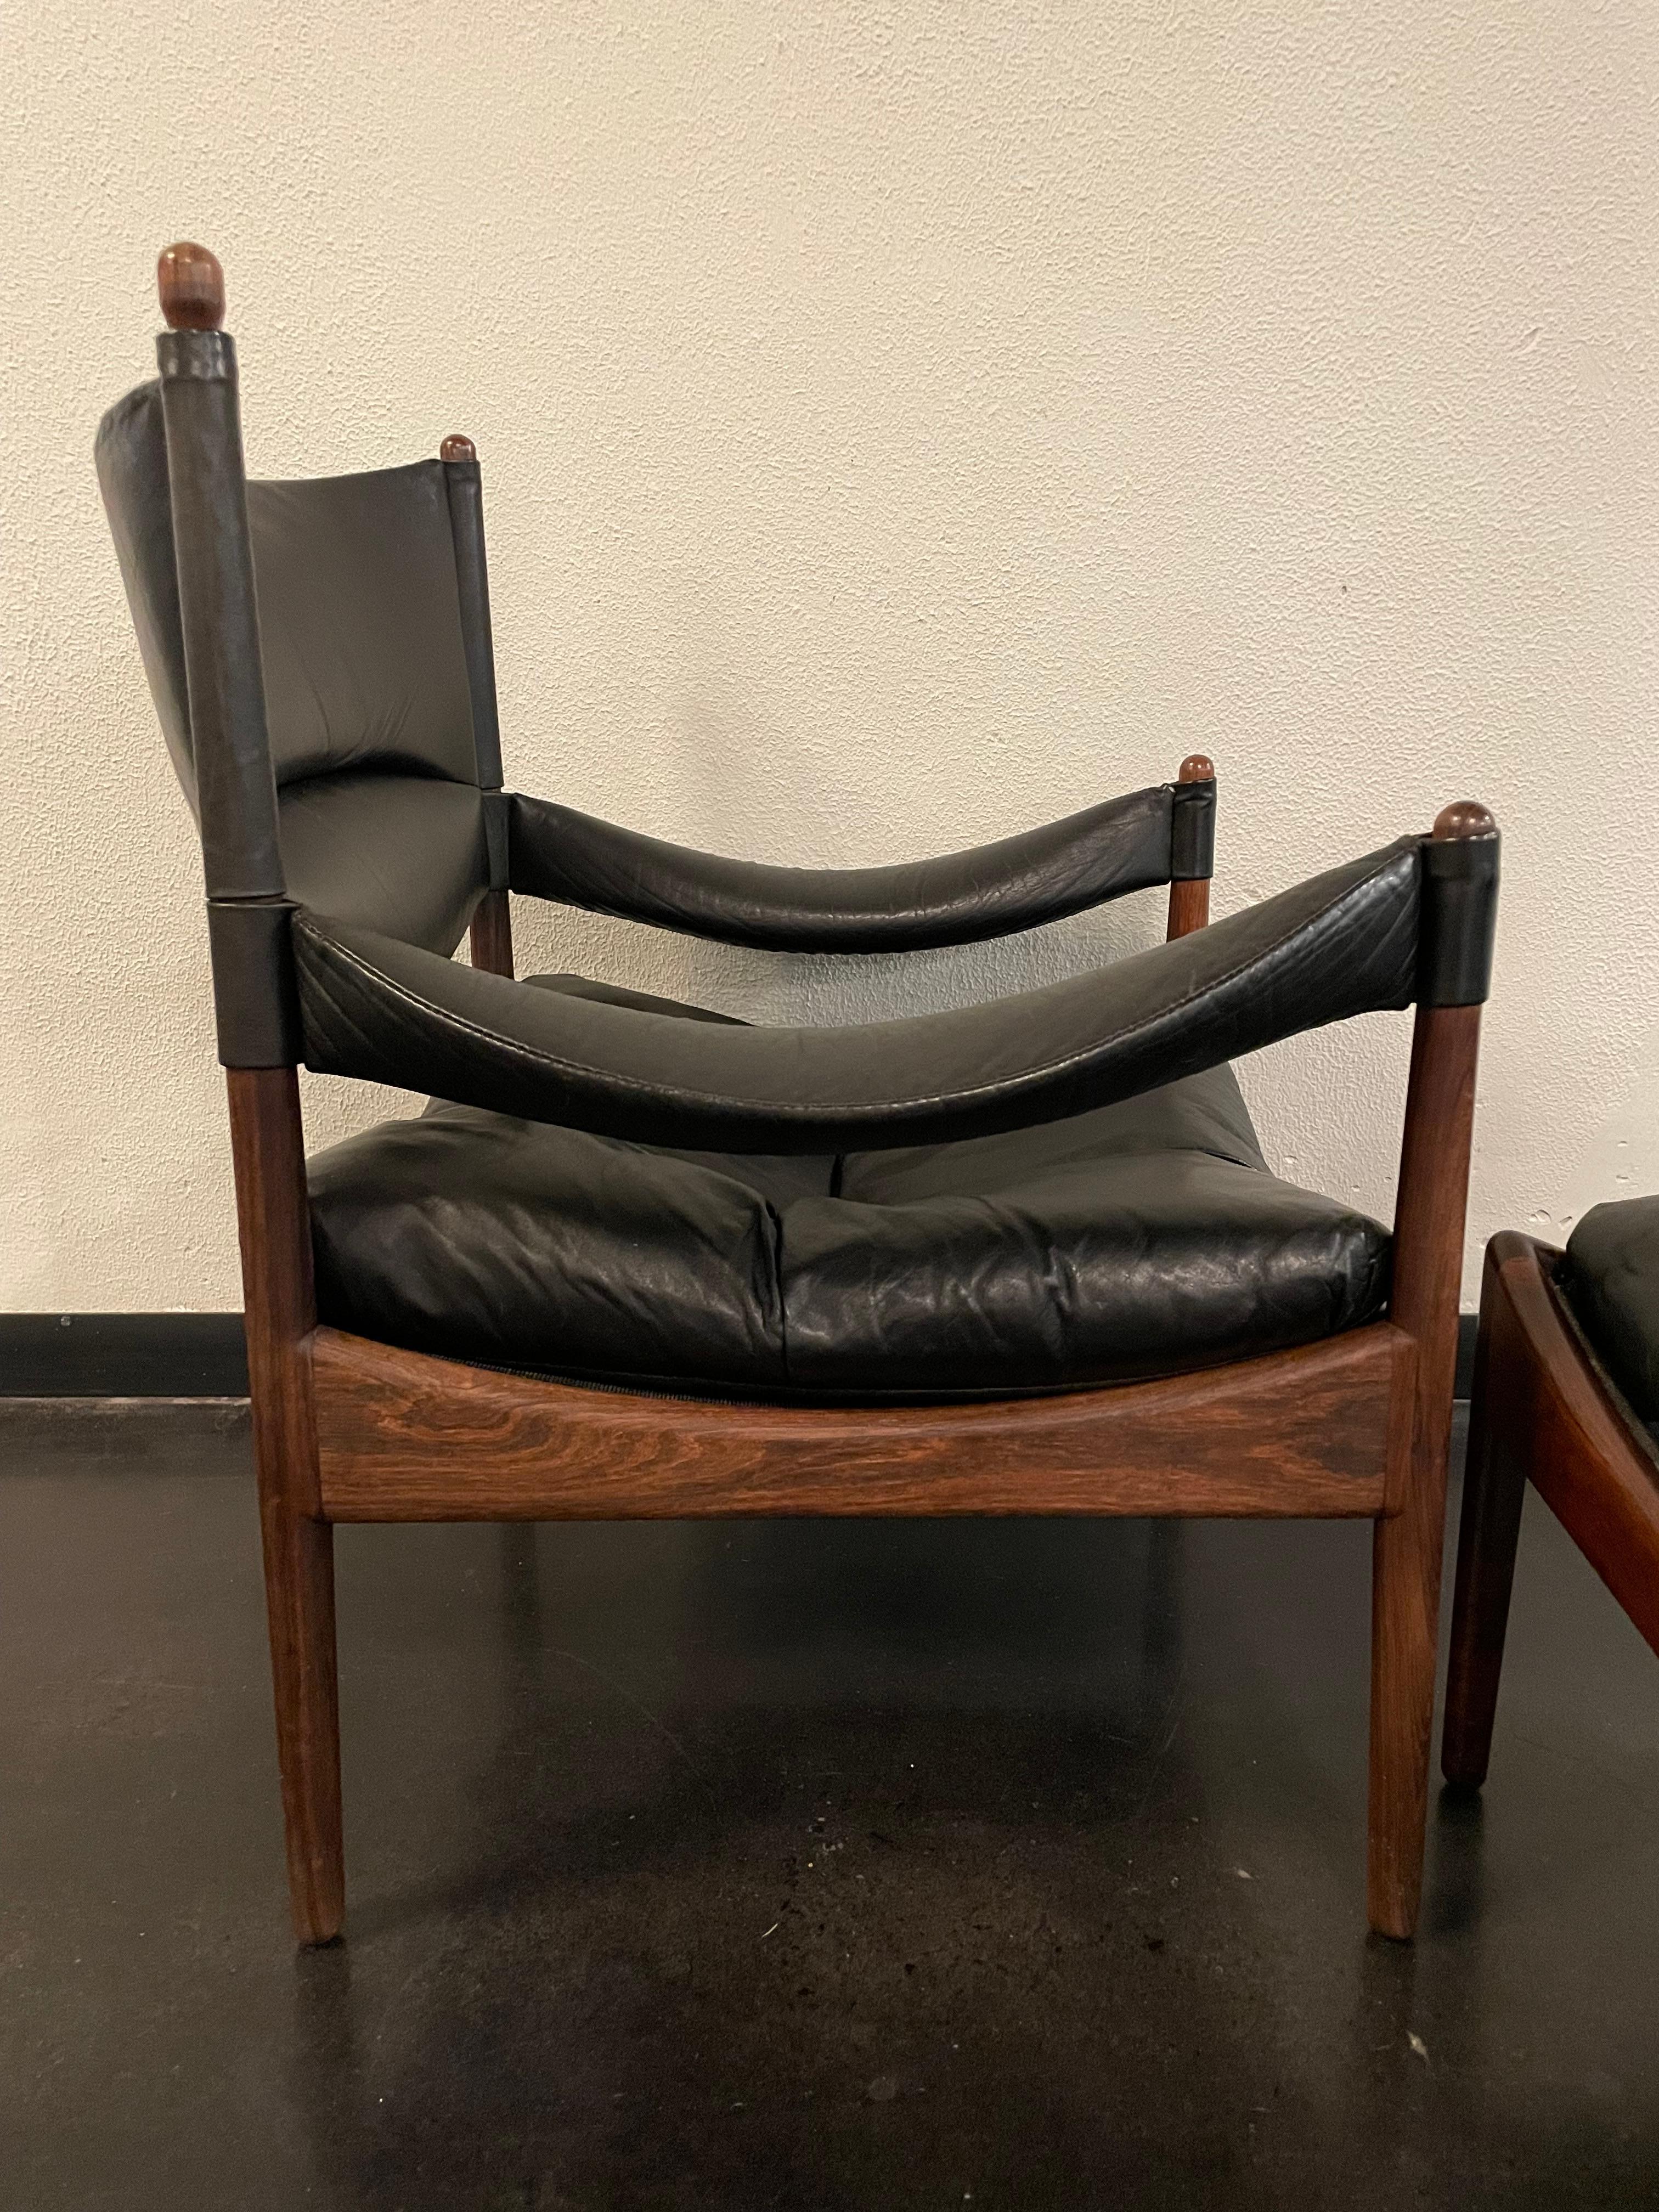 Danish rosewood and leather modus lounge chair. Attributed to Kristian Vedel for Soren Willadsen. Ottoman included in set.